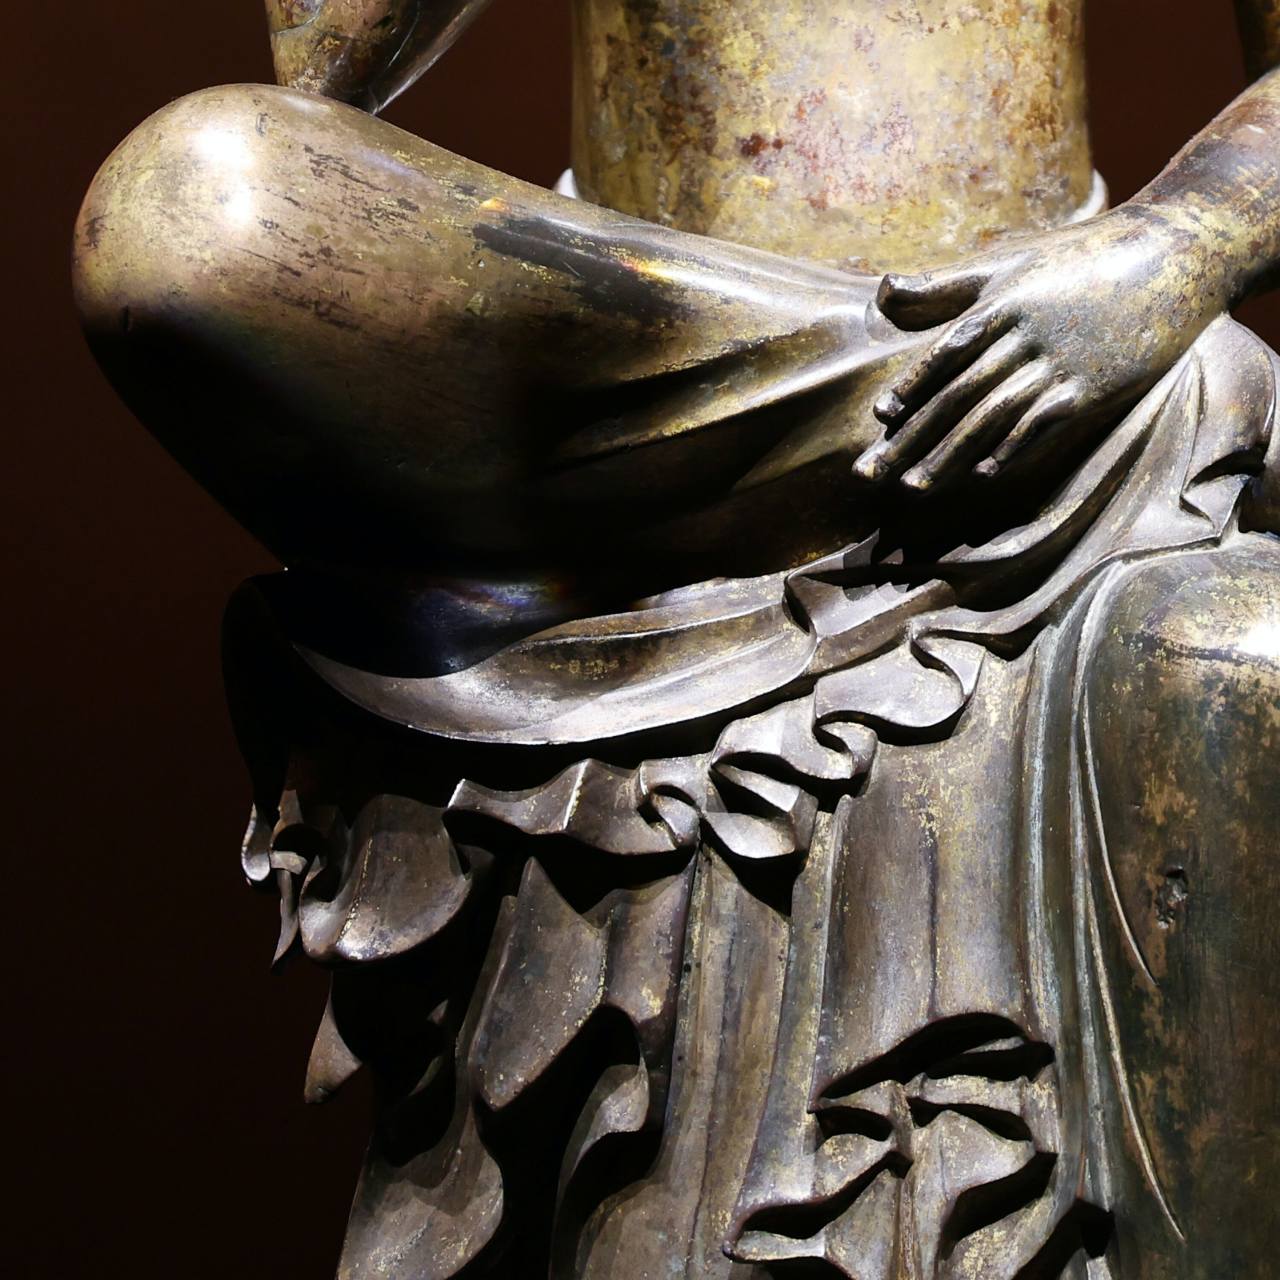 A detailed view shows the left hand and draping skirt of the Gilt-bronze Maitreya in Meditation on display at the National Museum of Korea in Seoul. (Hyungwon Kang)